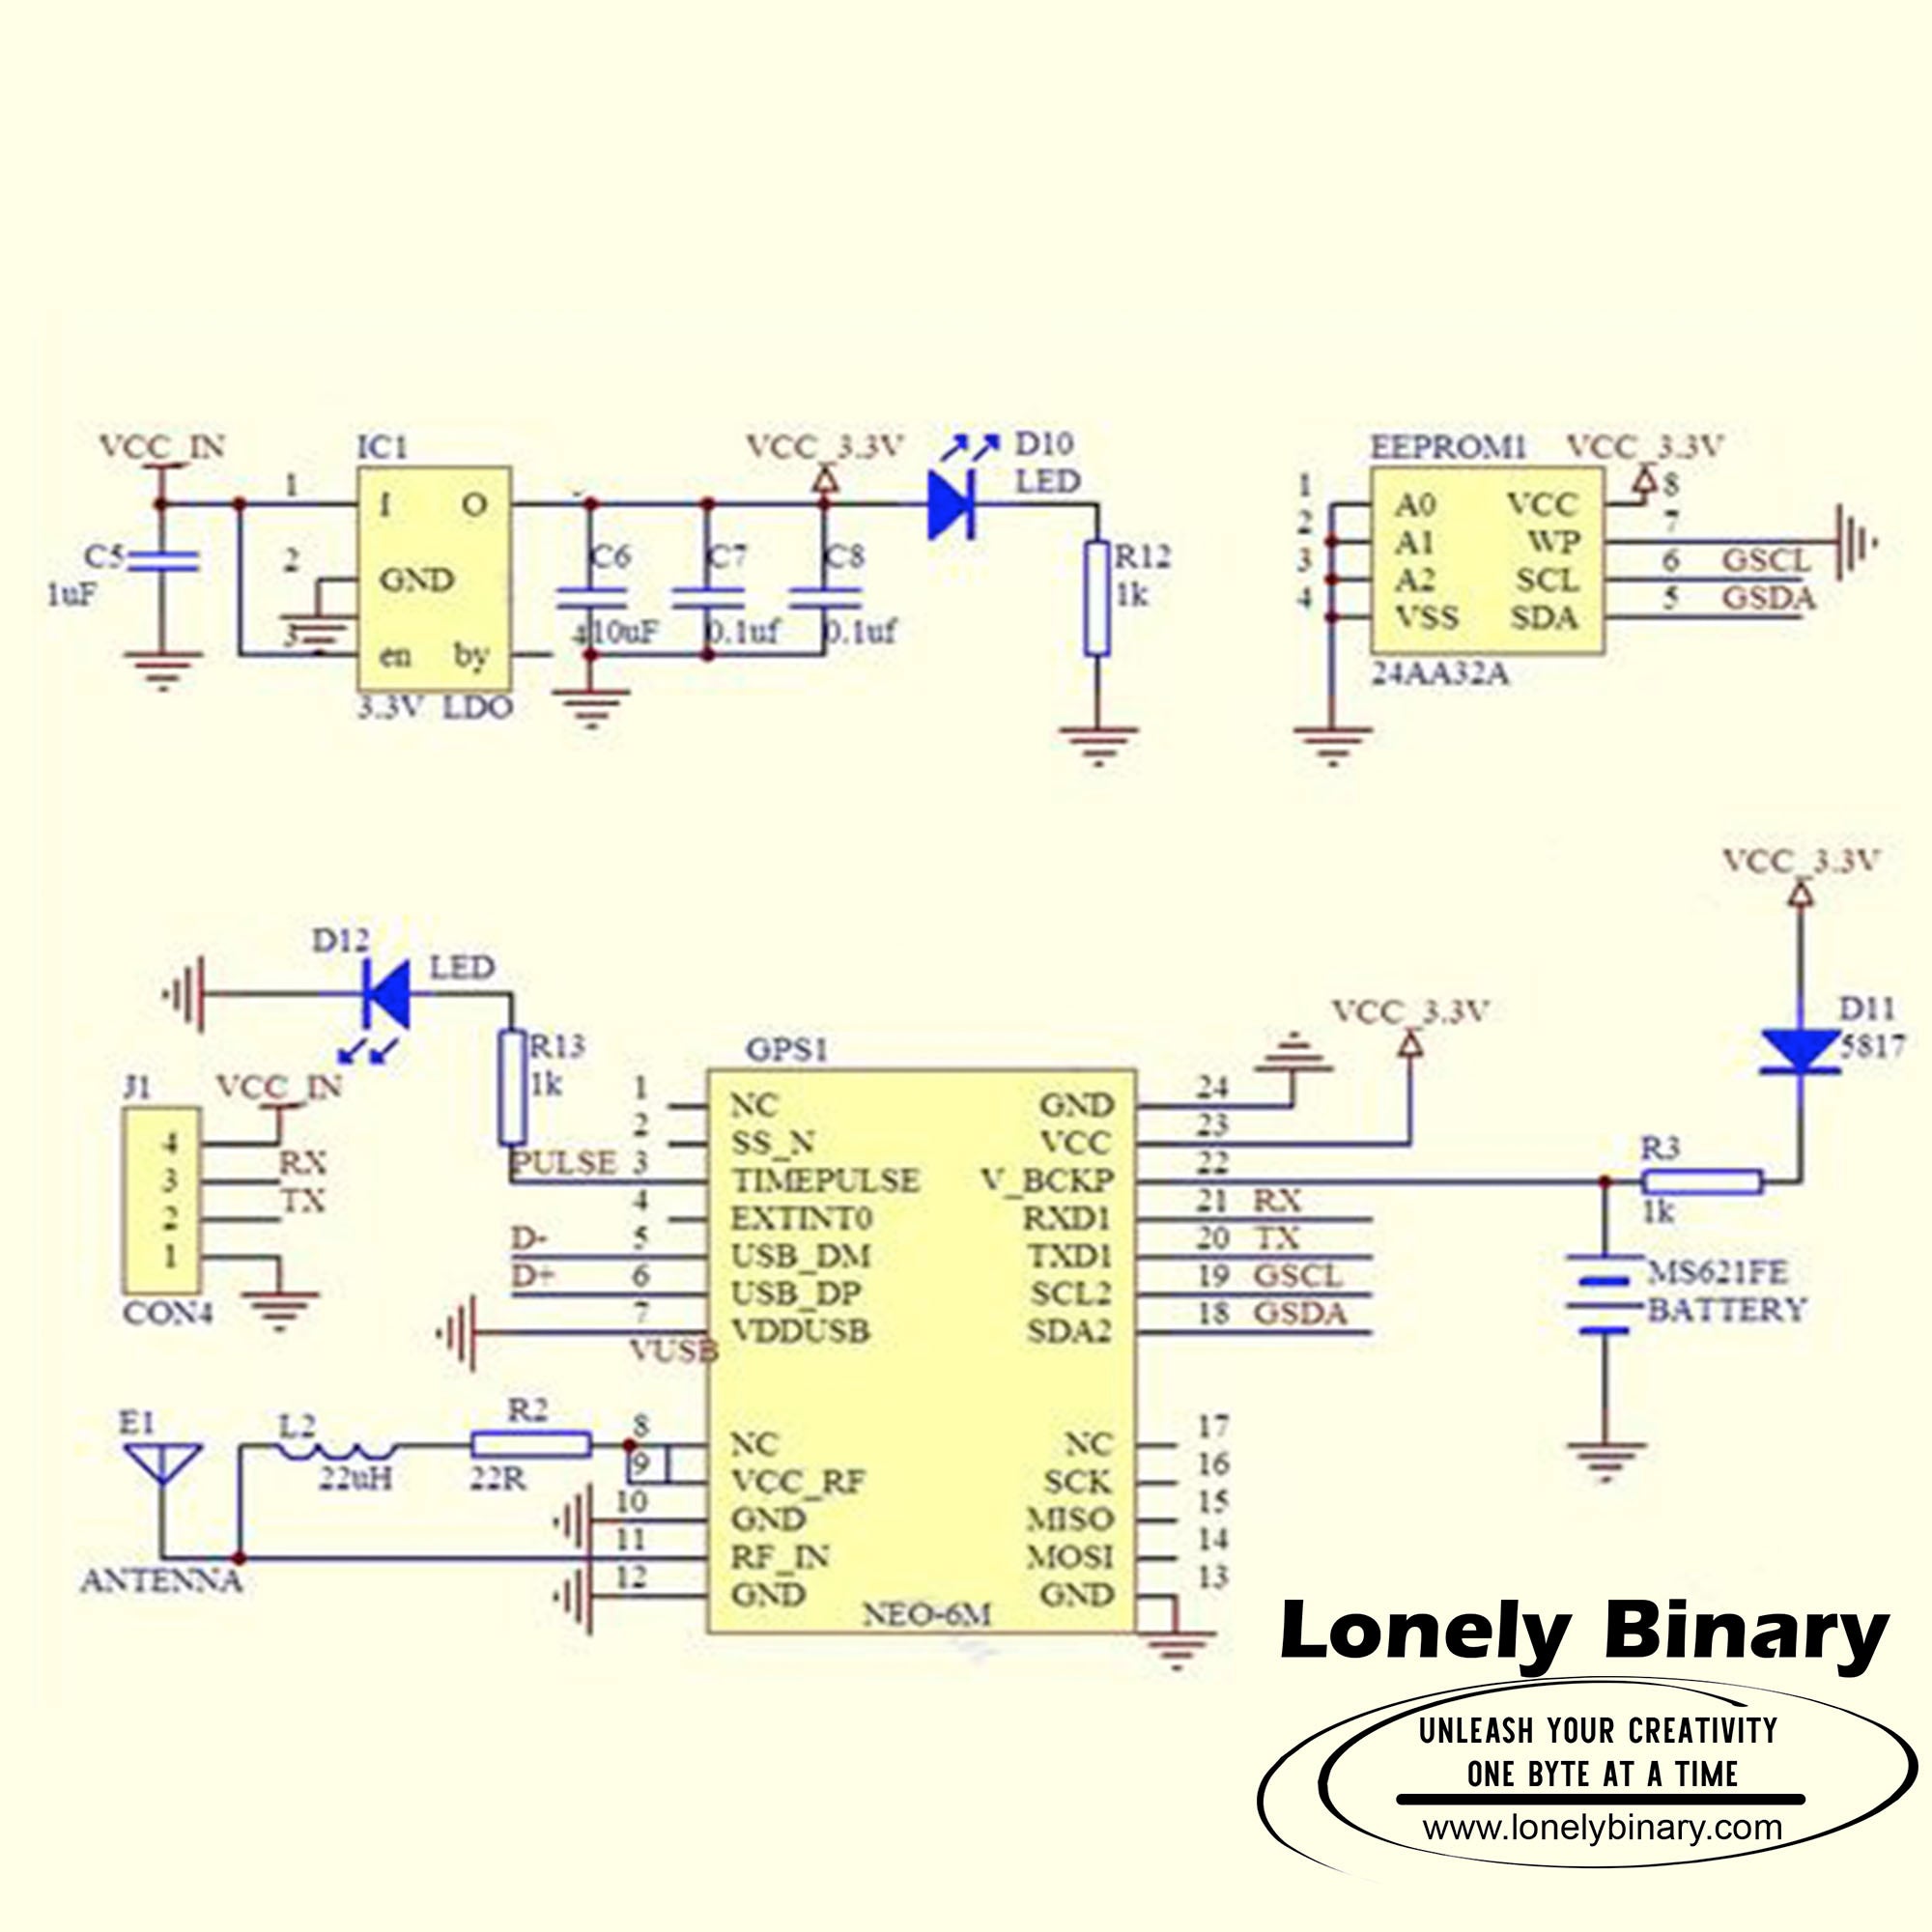 Lonely Binary Product Schematics